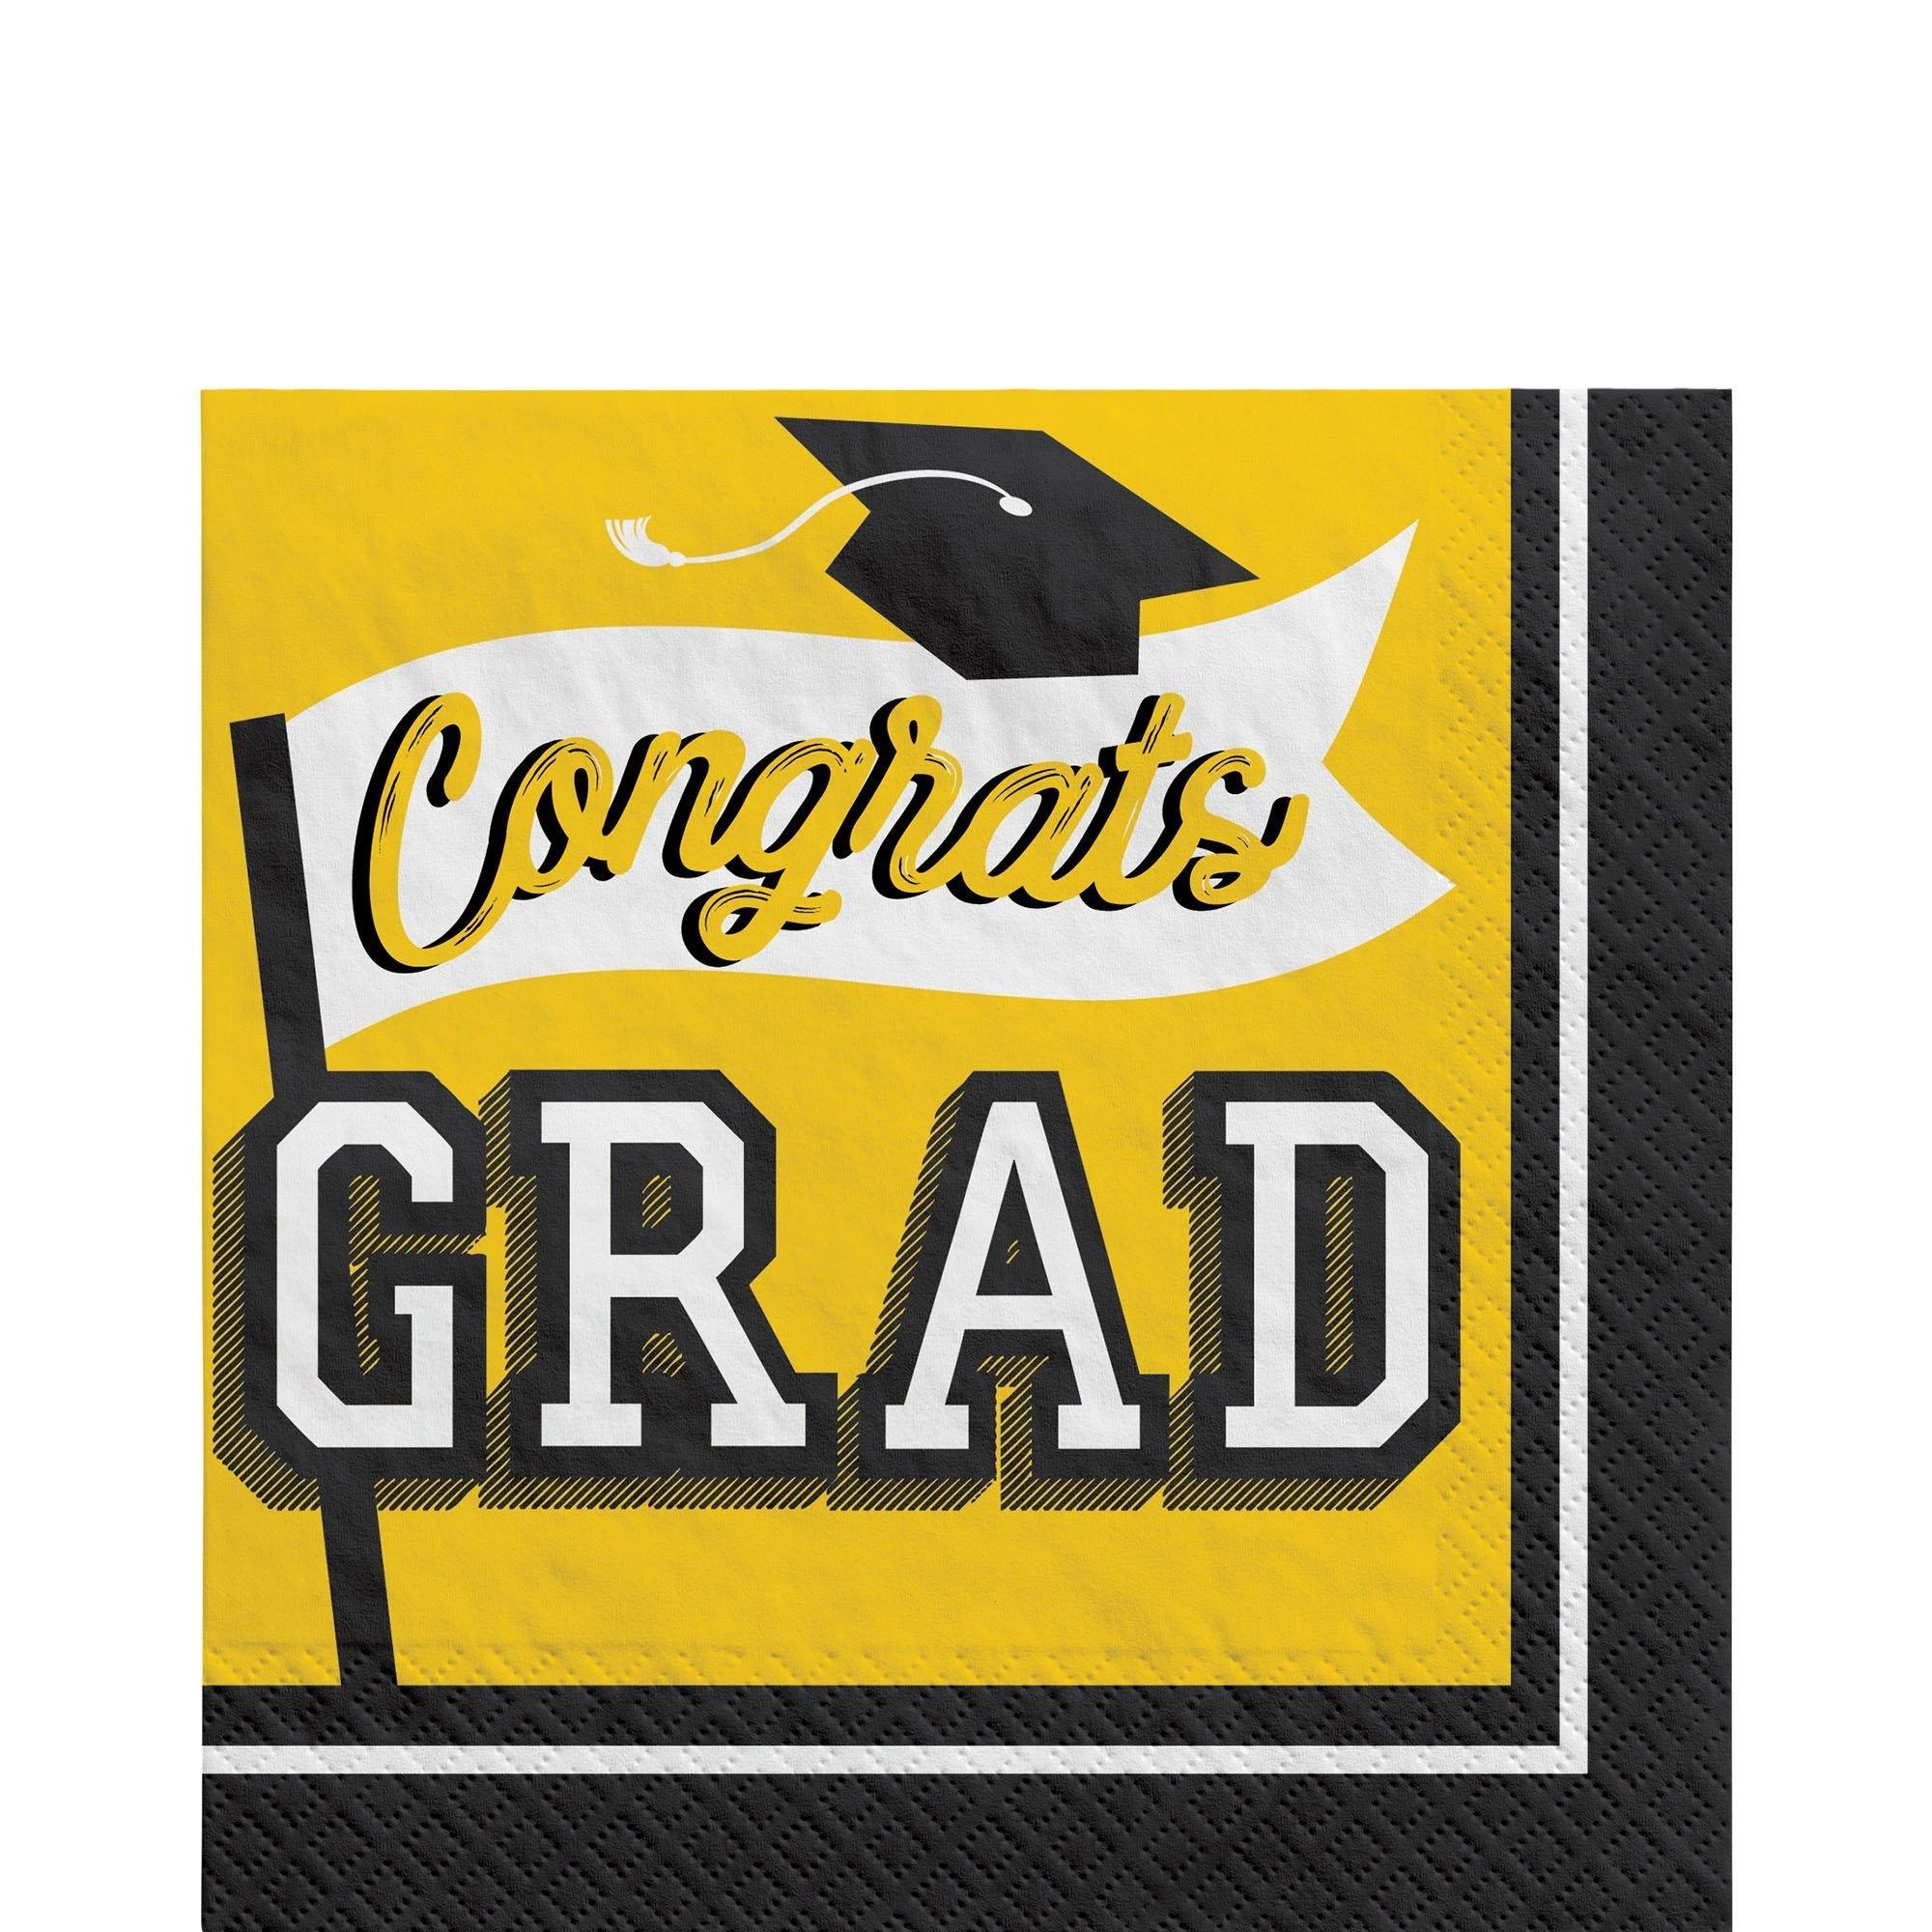 Graduation Party Supplies Kit for 40 with Decorations, Banners, Plates, Napkins, Cups - Yellow Congrats Grad